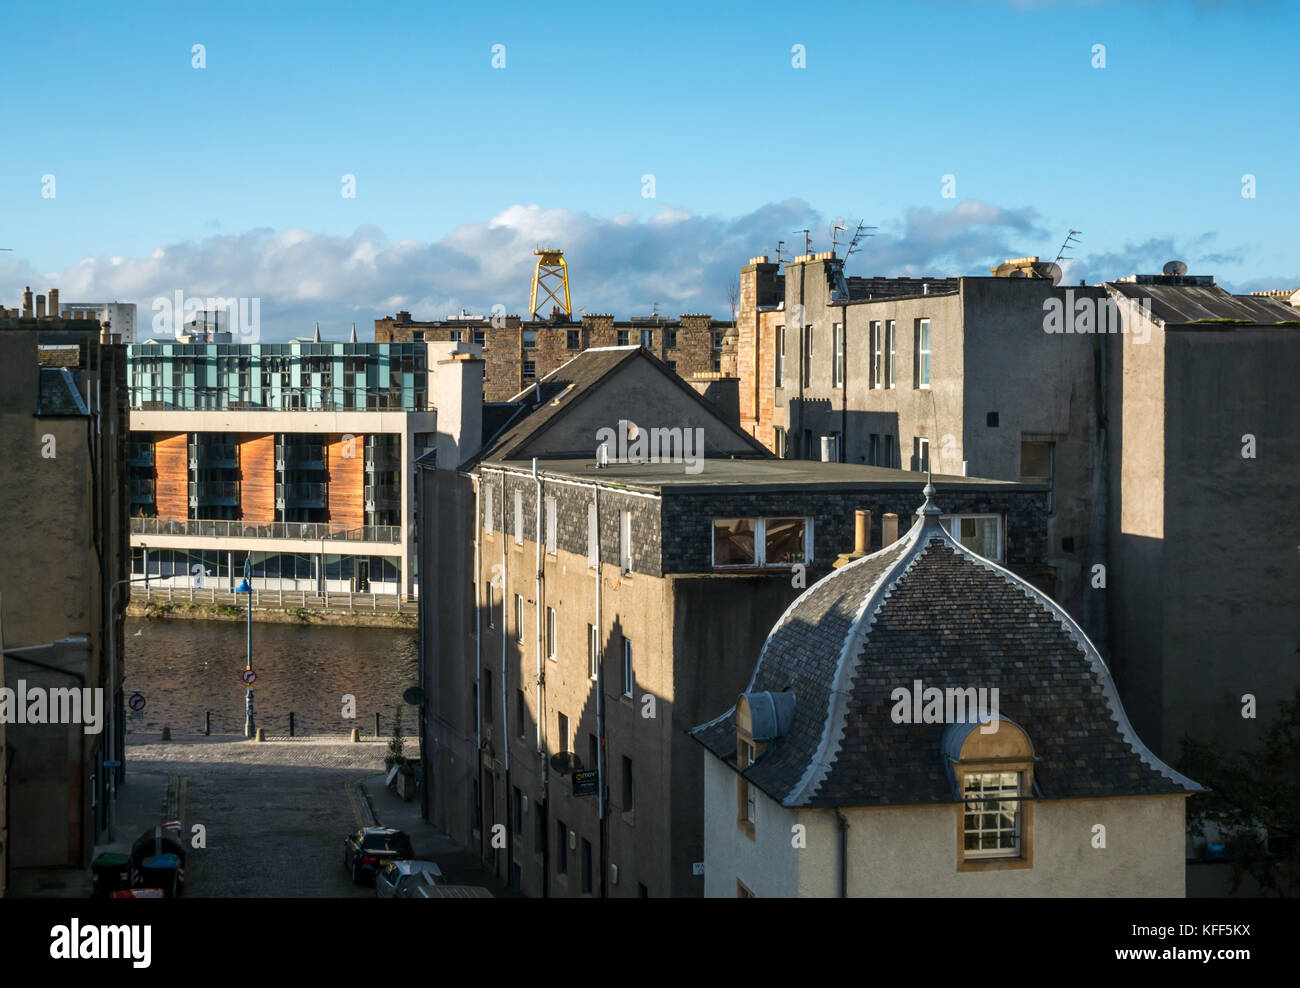 View over rooftops of old and modern buildings in Leith, Edinburgh, Scotland, UK, with huge yellow wind turbine platform in the distance Stock Photo